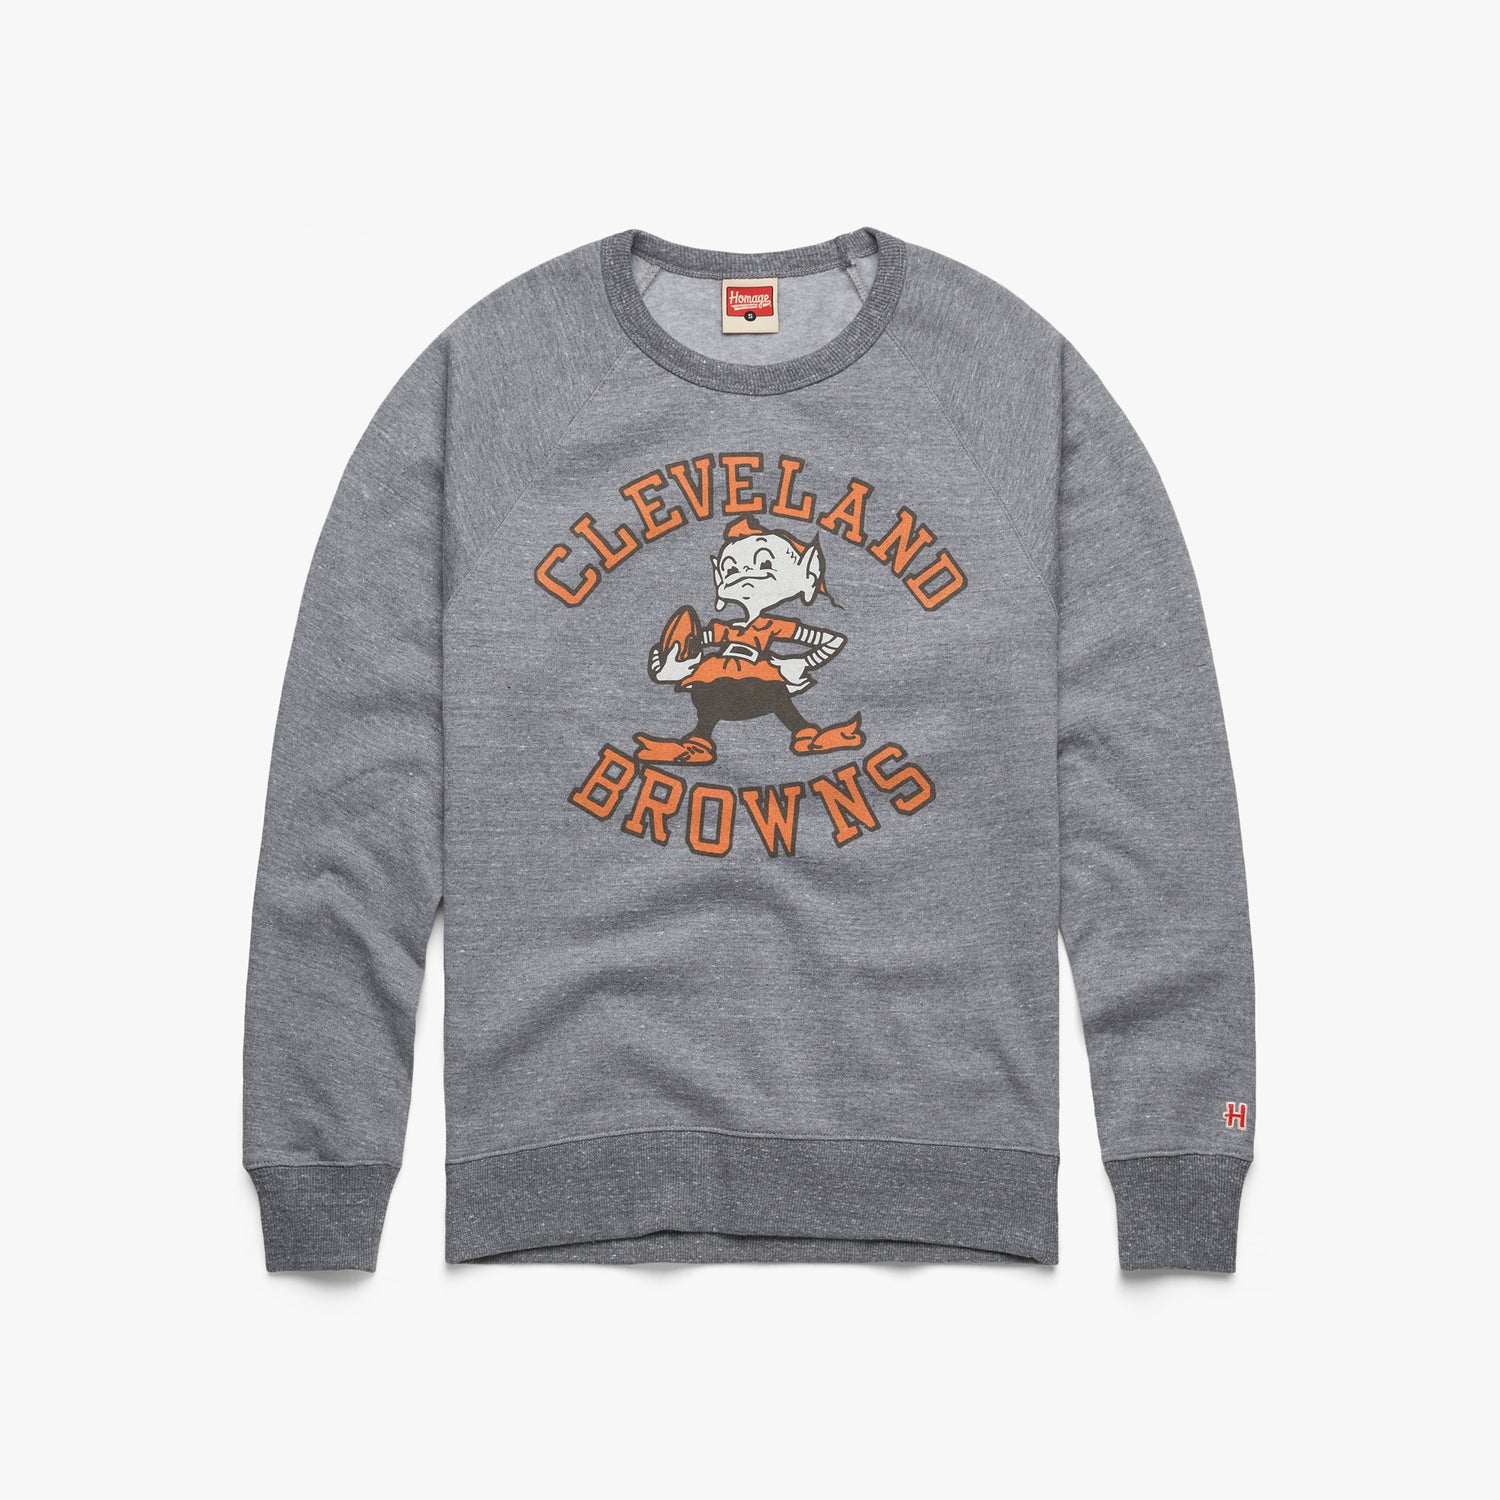 Cleveland Browns Brownie '59 Crewneck from Homage. | Officially Licensed Vintage NFL Apparel from Homage Pro Shop.